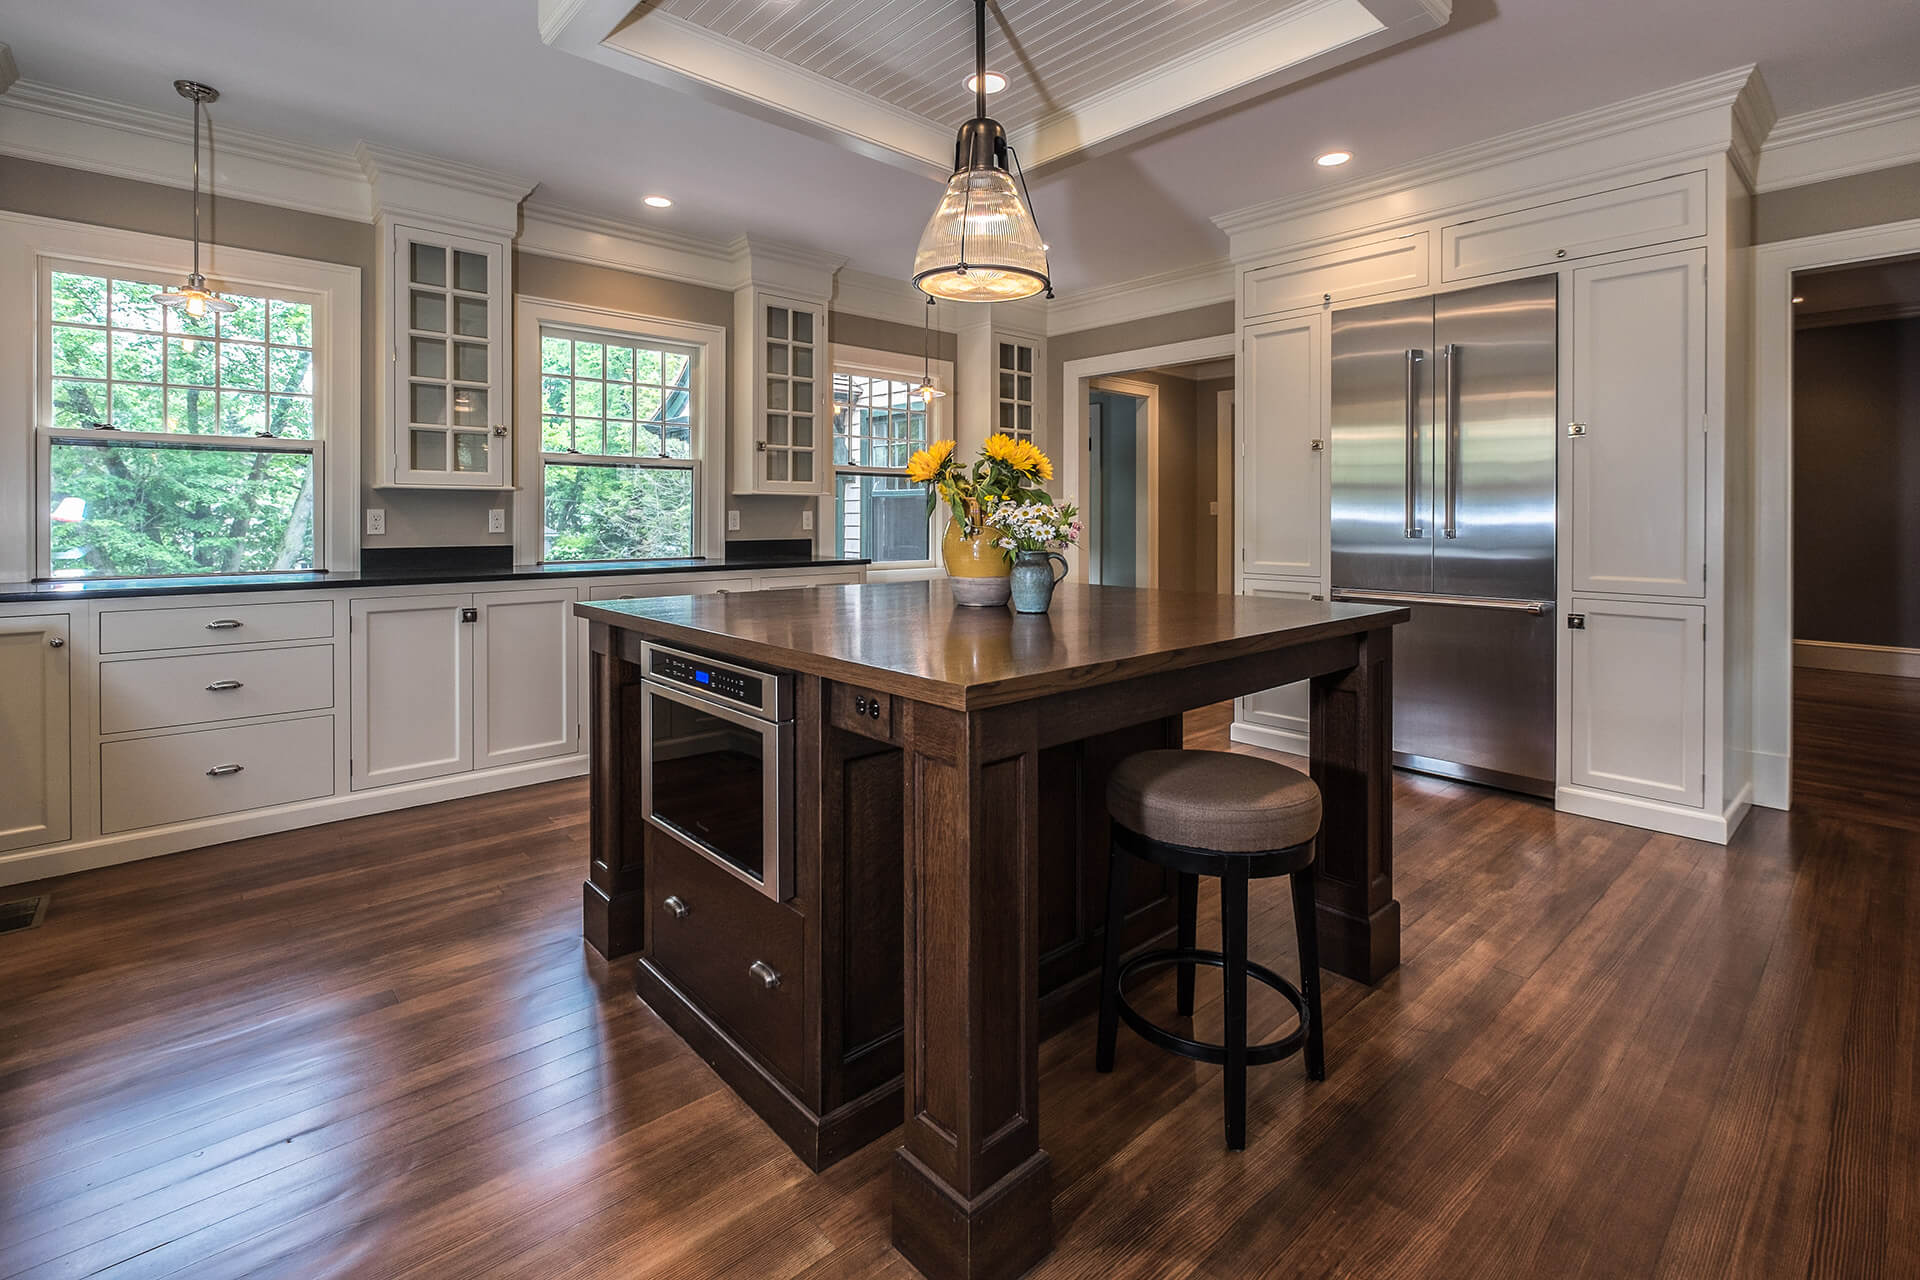 Kitchen cabinet hardware featured on Kennebec Company design